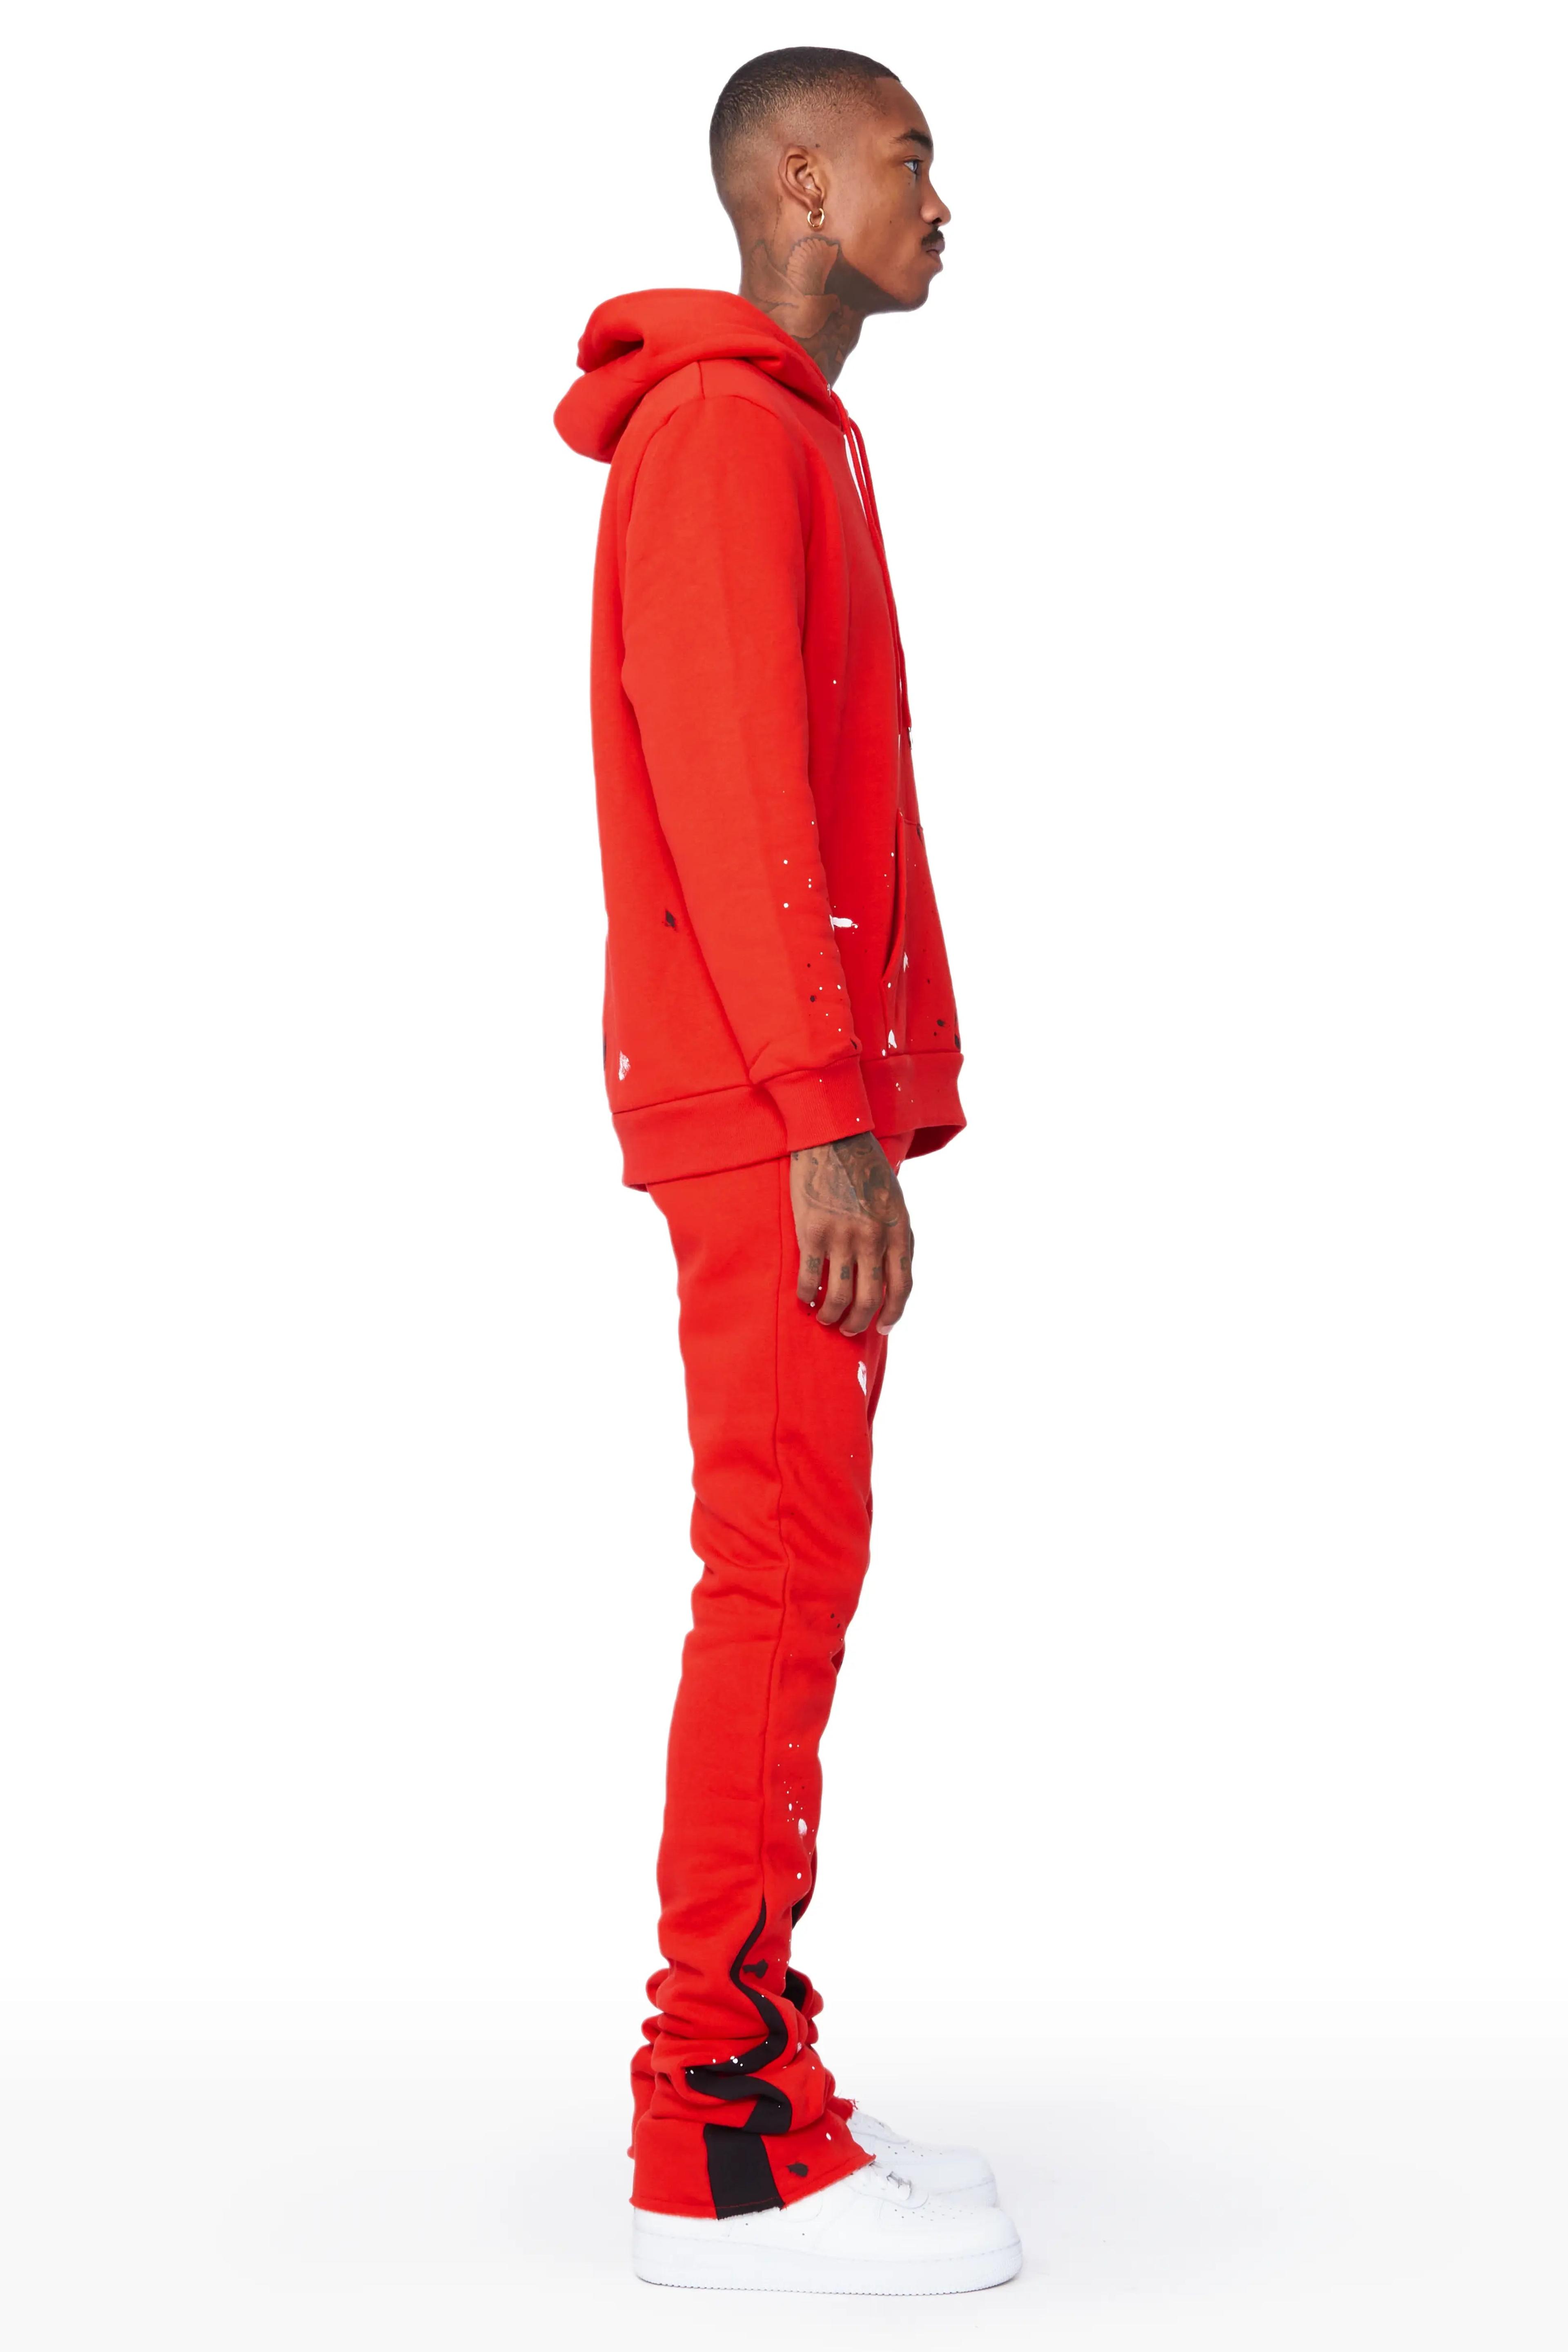 Alternate View 2 of Jaco Red Hoodie/Super Stacked Flare Pant Track Set